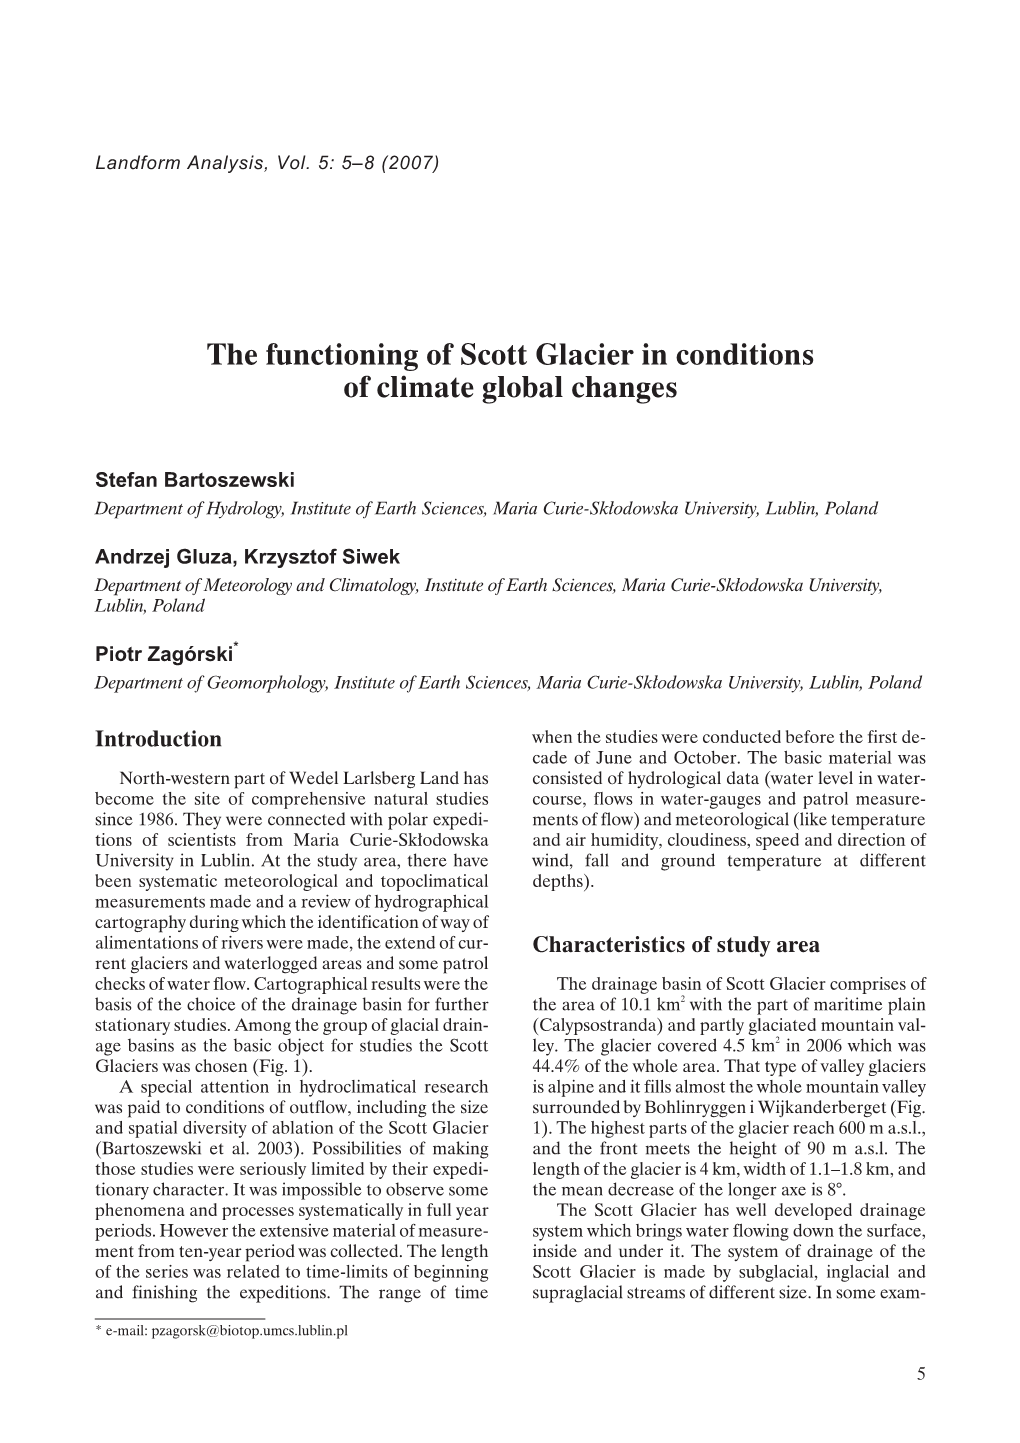 The Functioning of Scott Glacier in Conditions of Climate Global Changes